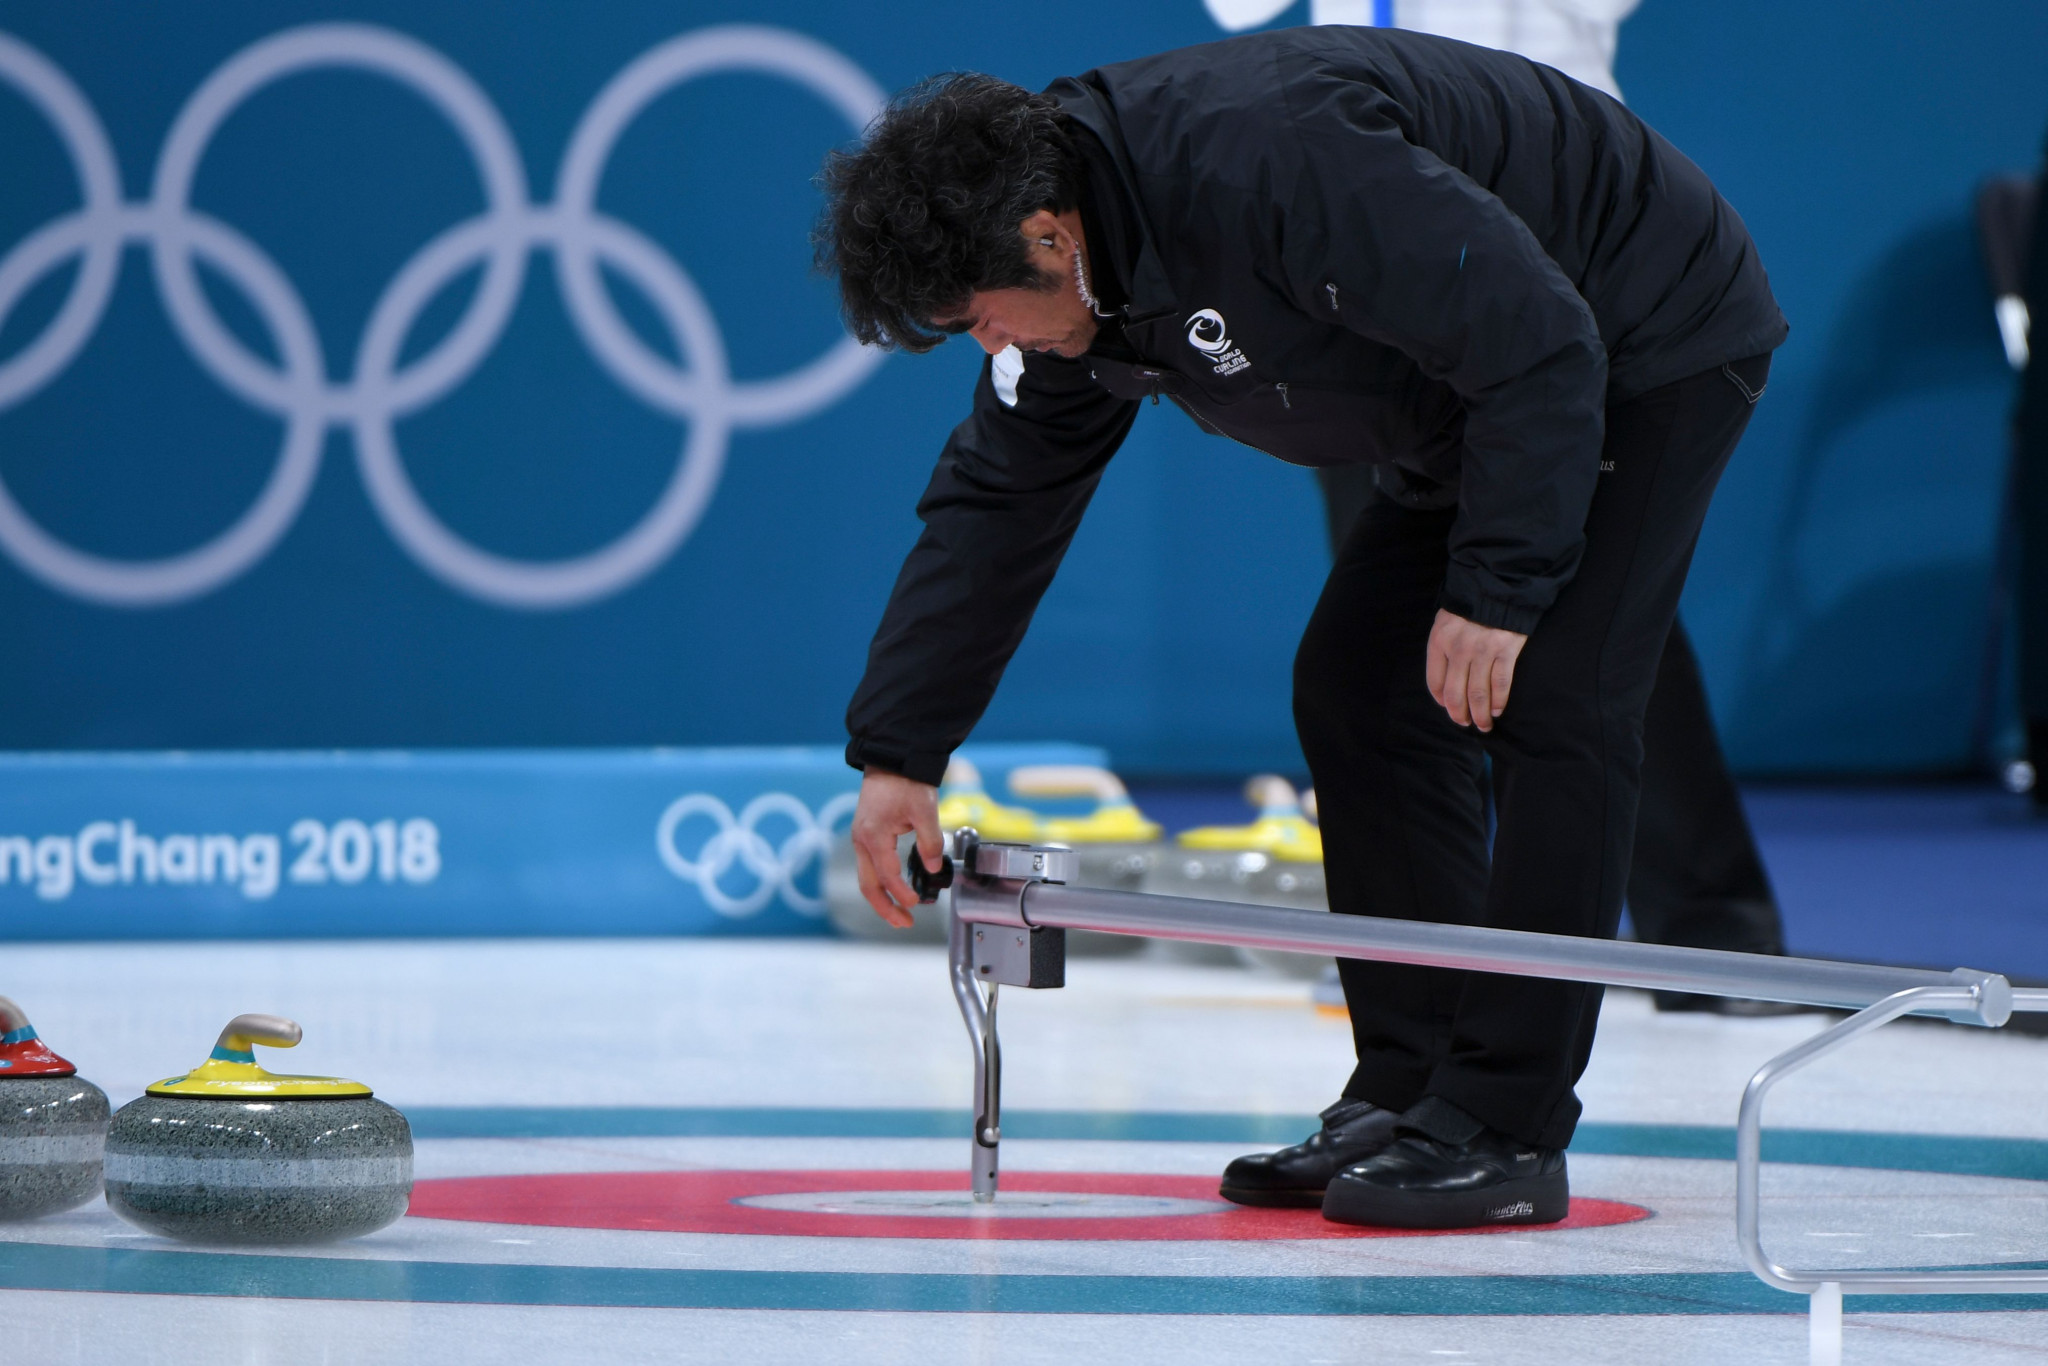 The World Curling Federation announced the international technical officials for the Beijing 2022 Winter Olympic and Paralympic Games ©Getty Images